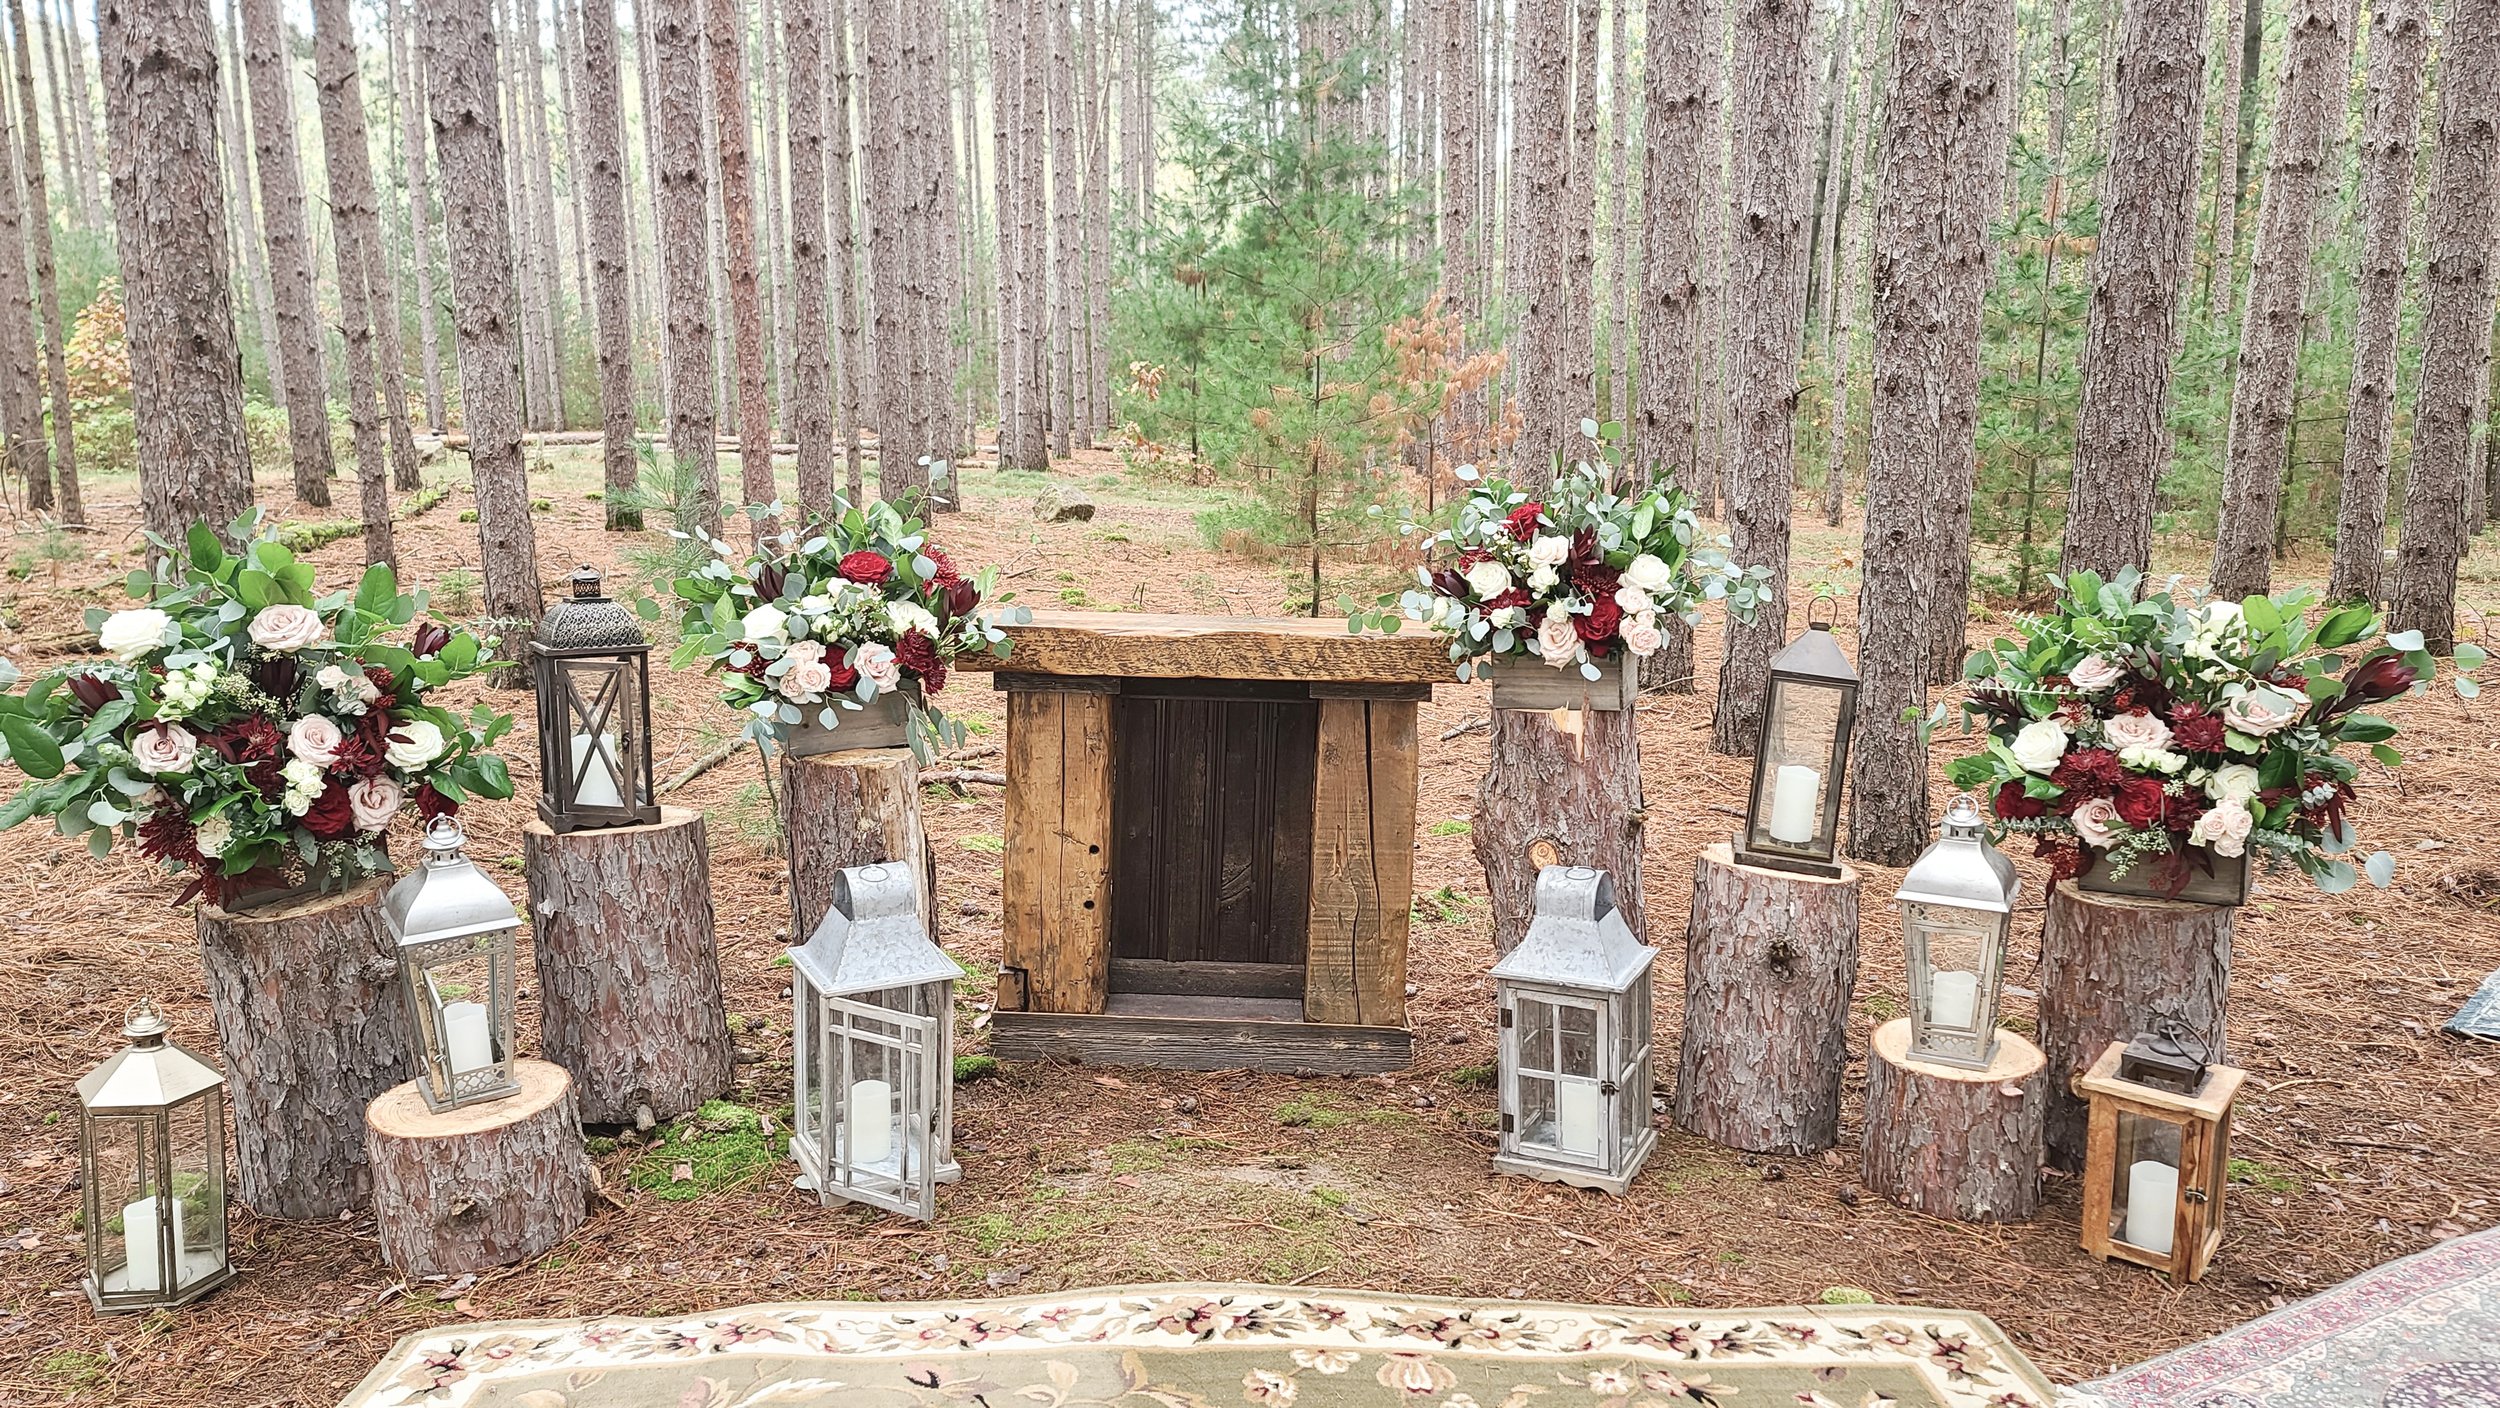 Rustic, yet enchanted look -all floral centerpieces in wood boxes